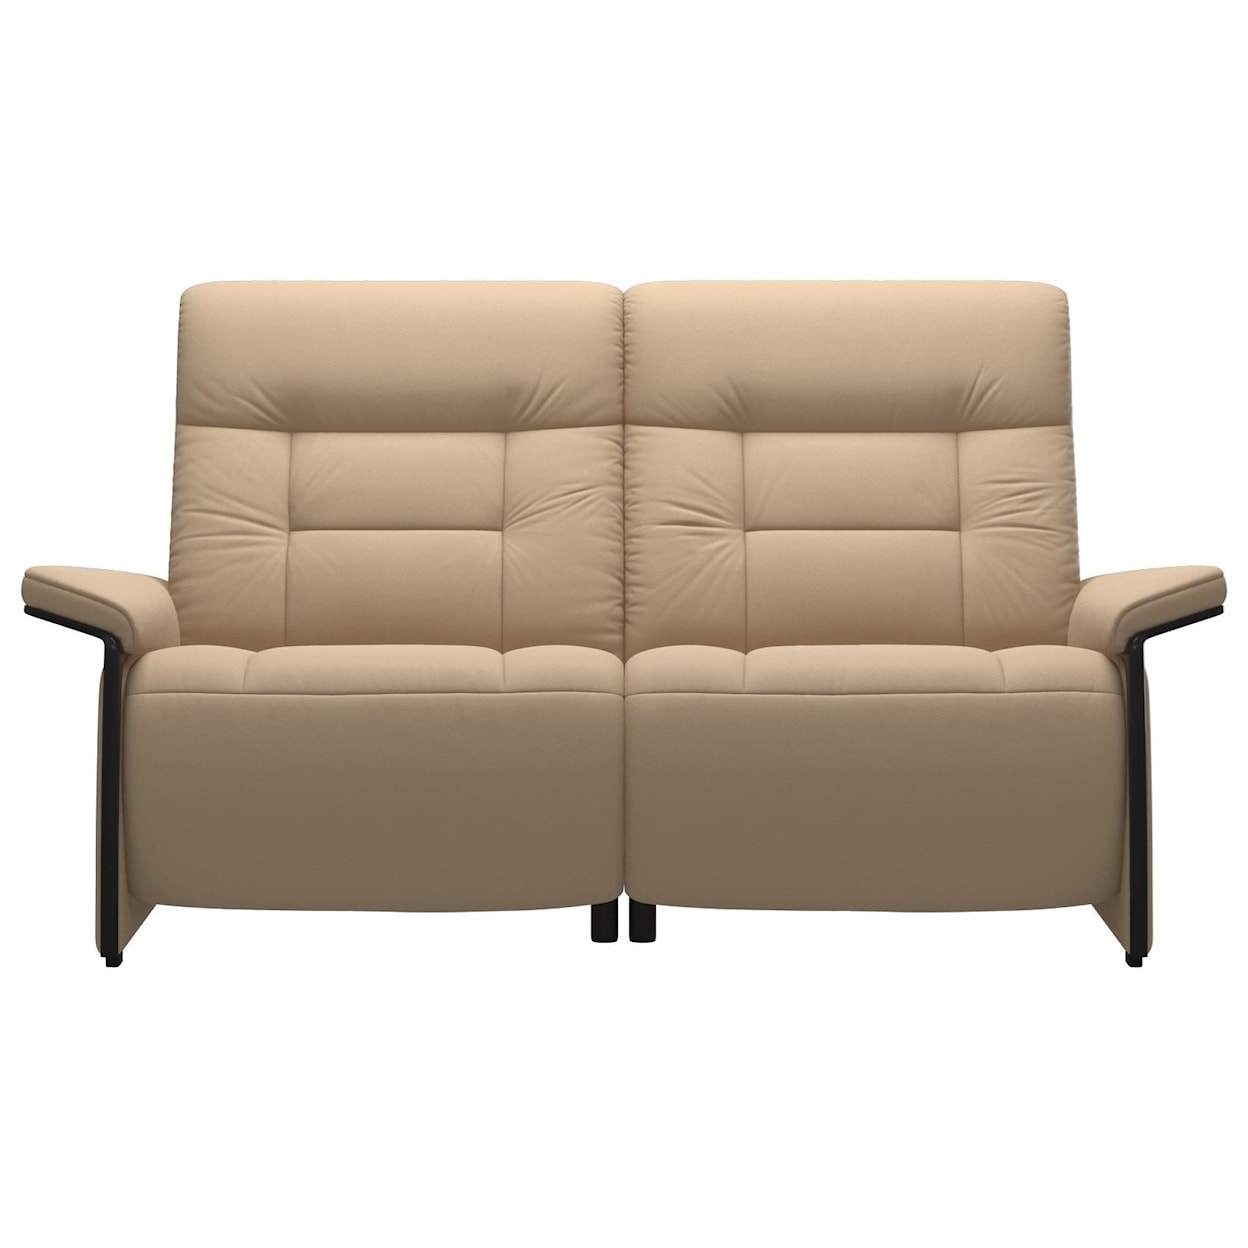 Stressless Mary Reclining 2 Seat Loveseat with Wood Arms